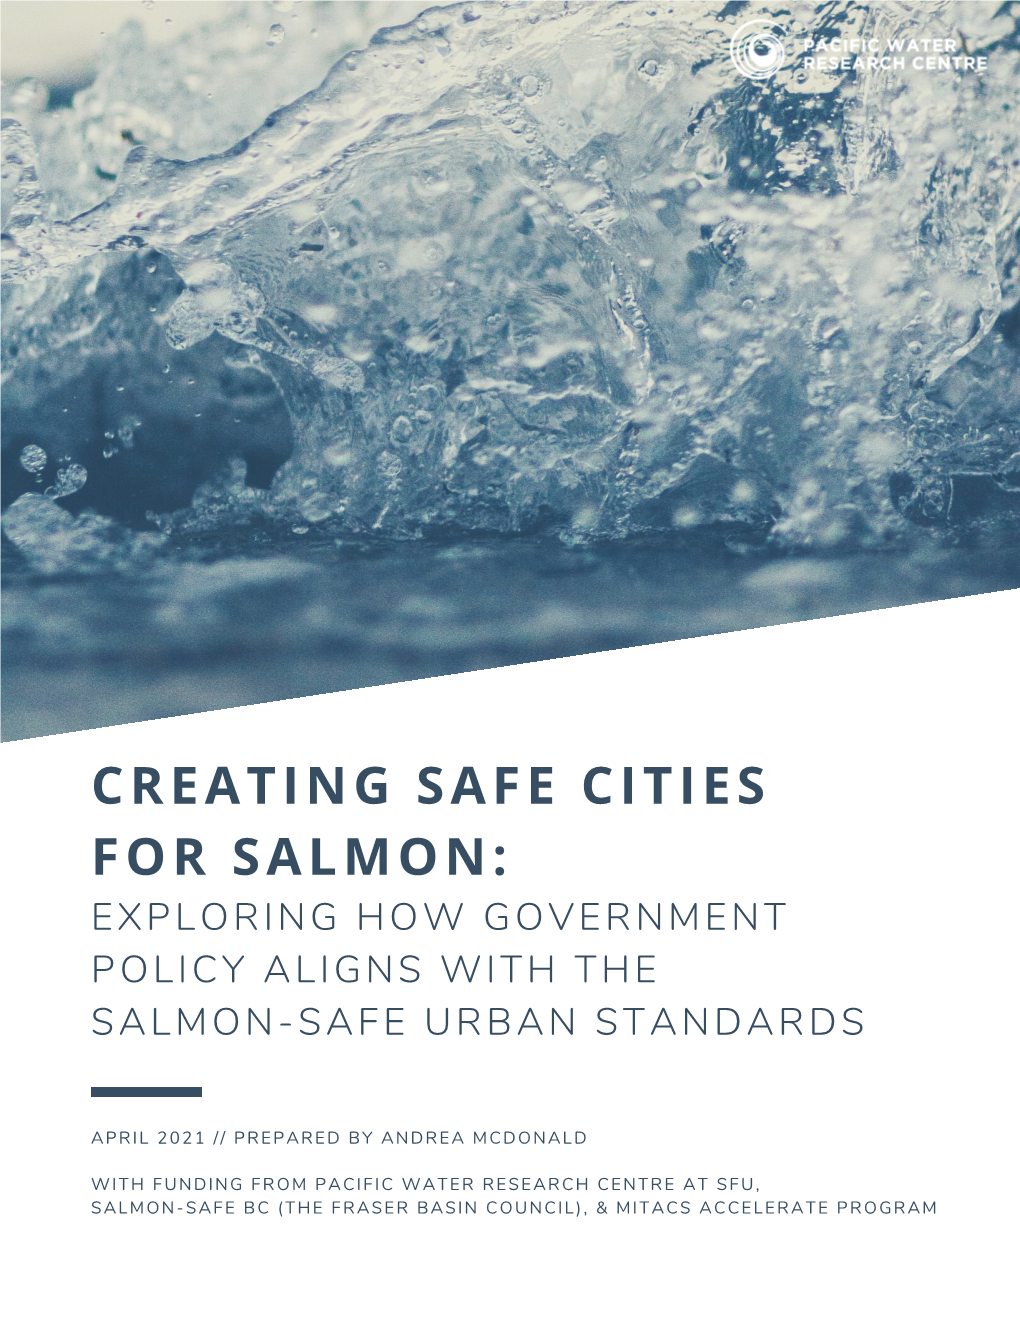 Creating Safe Cities for Salmon: Exploring How Government Policy Aligns with the Salmon-Safe Urban Standards